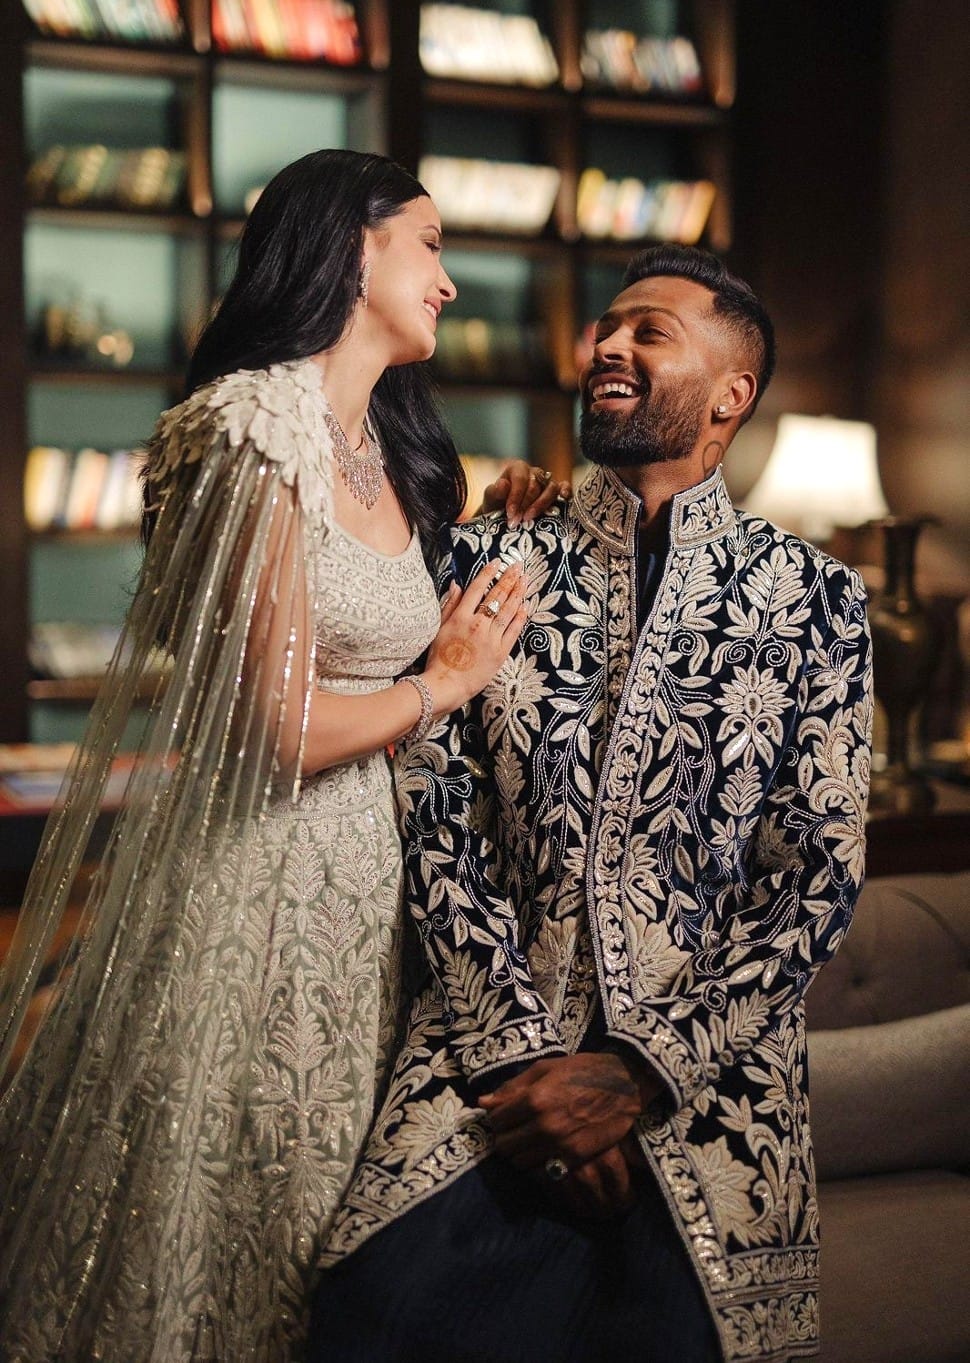 Gujarat Titans (GT) captain Hardik Pandya is married to Serbian model and Bollywood star Natasa Stankovic. The couple renewed their marriage vows last month and have one son, Agastya, together. (Source: Twitter)